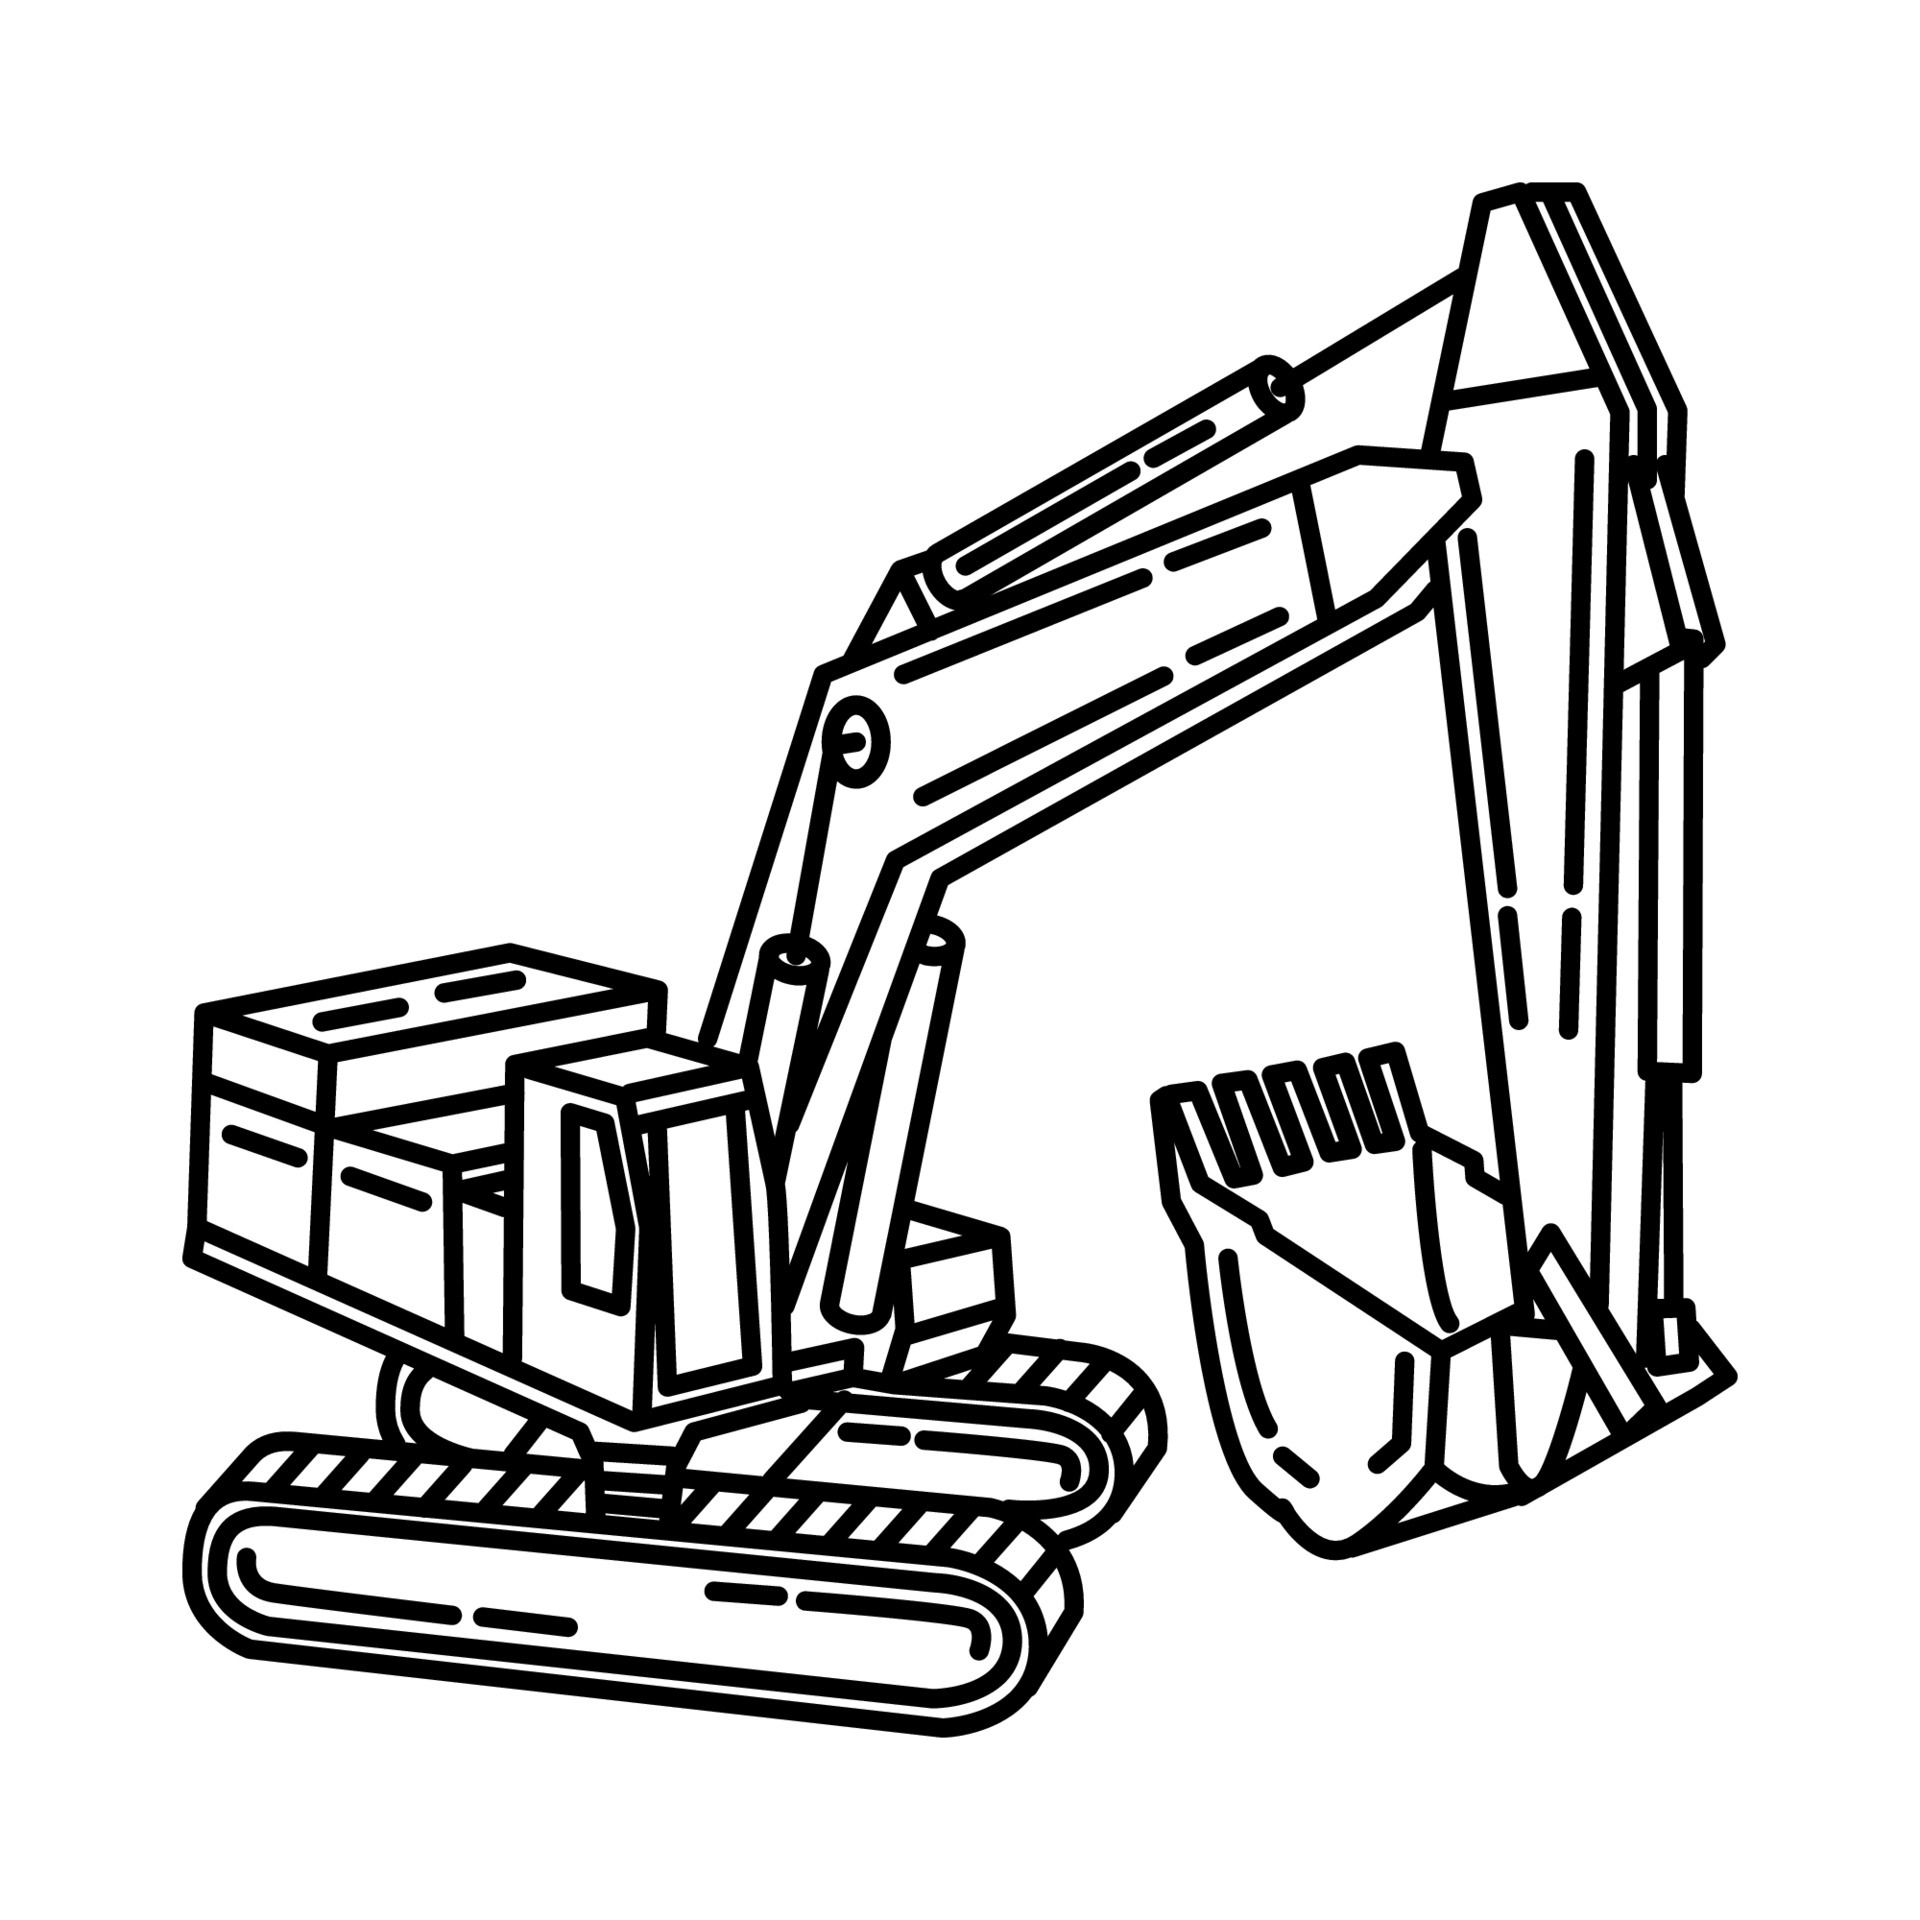 How to Draw Excavators in 11 Steps | HowStuffWorks